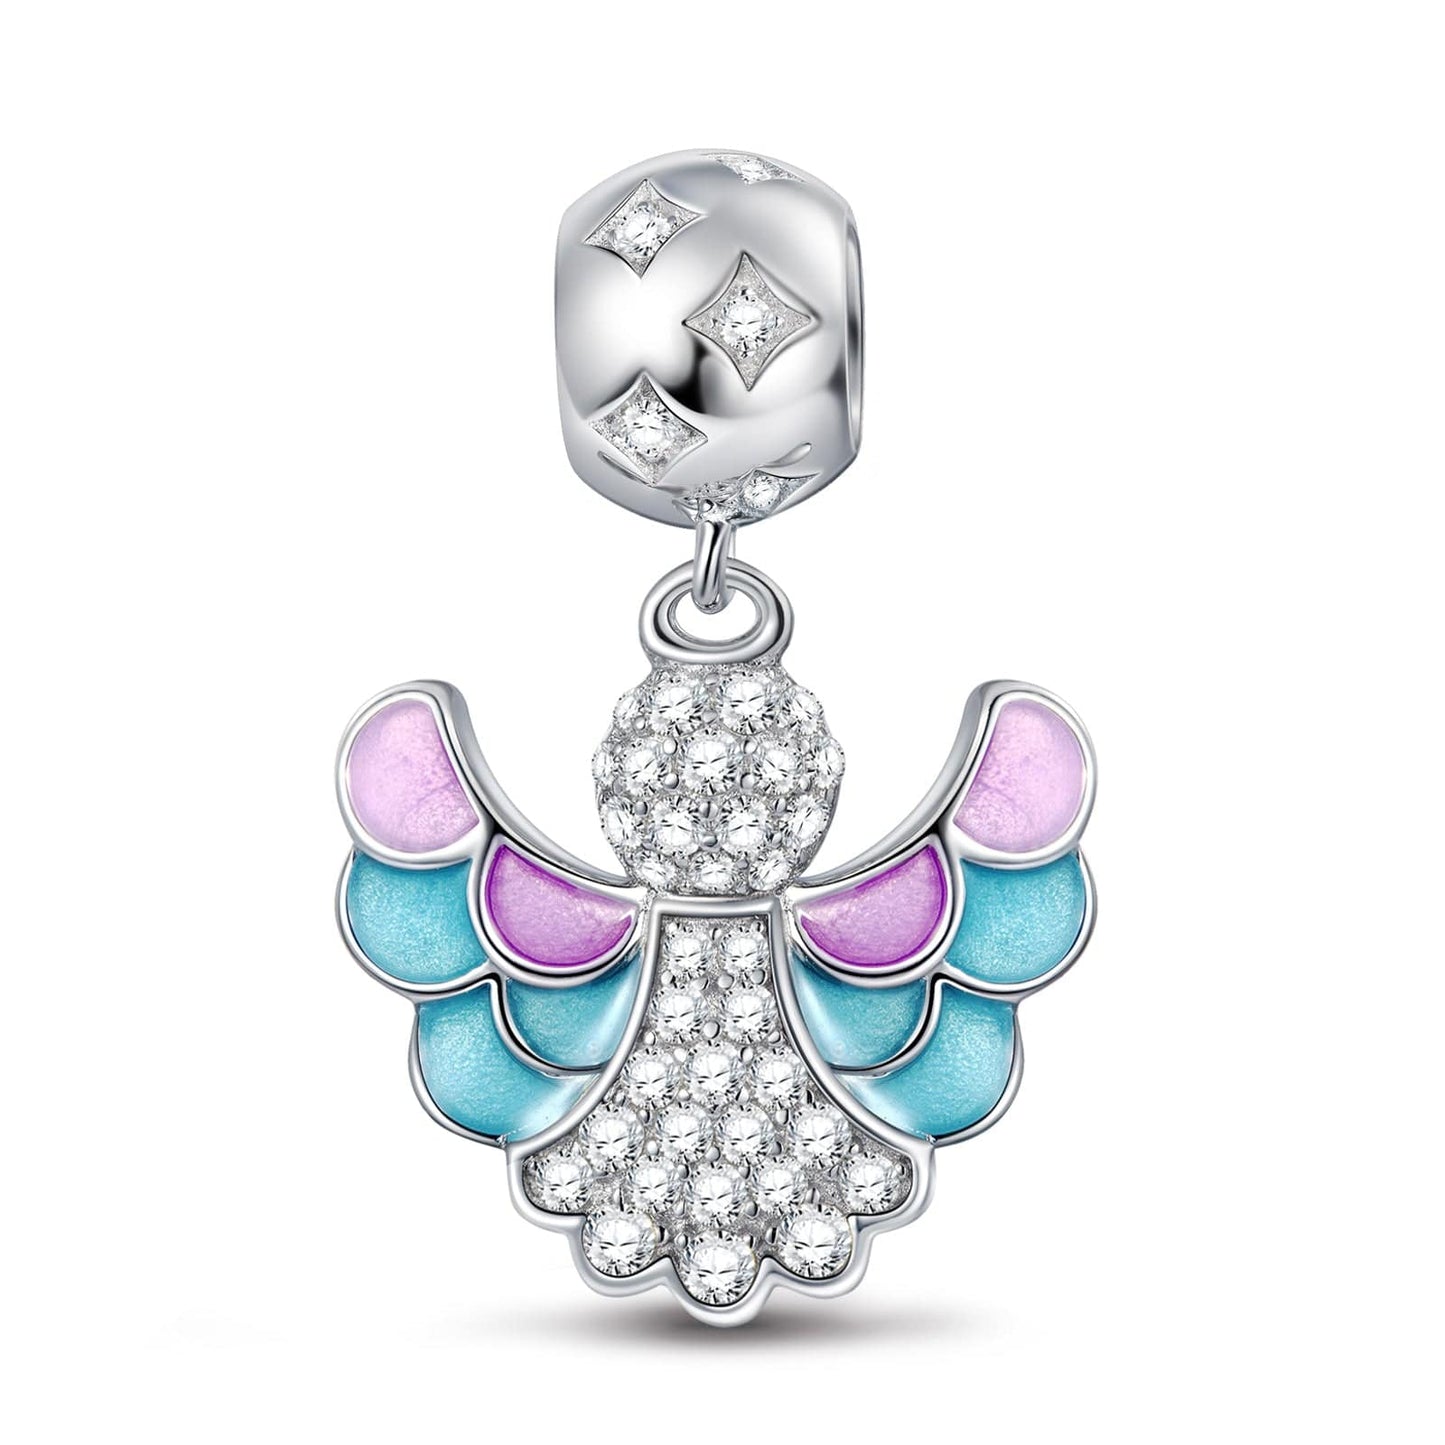 Little Dancing Angel Tarnish-resistant Silver Charms With Enamel In White Gold Plated